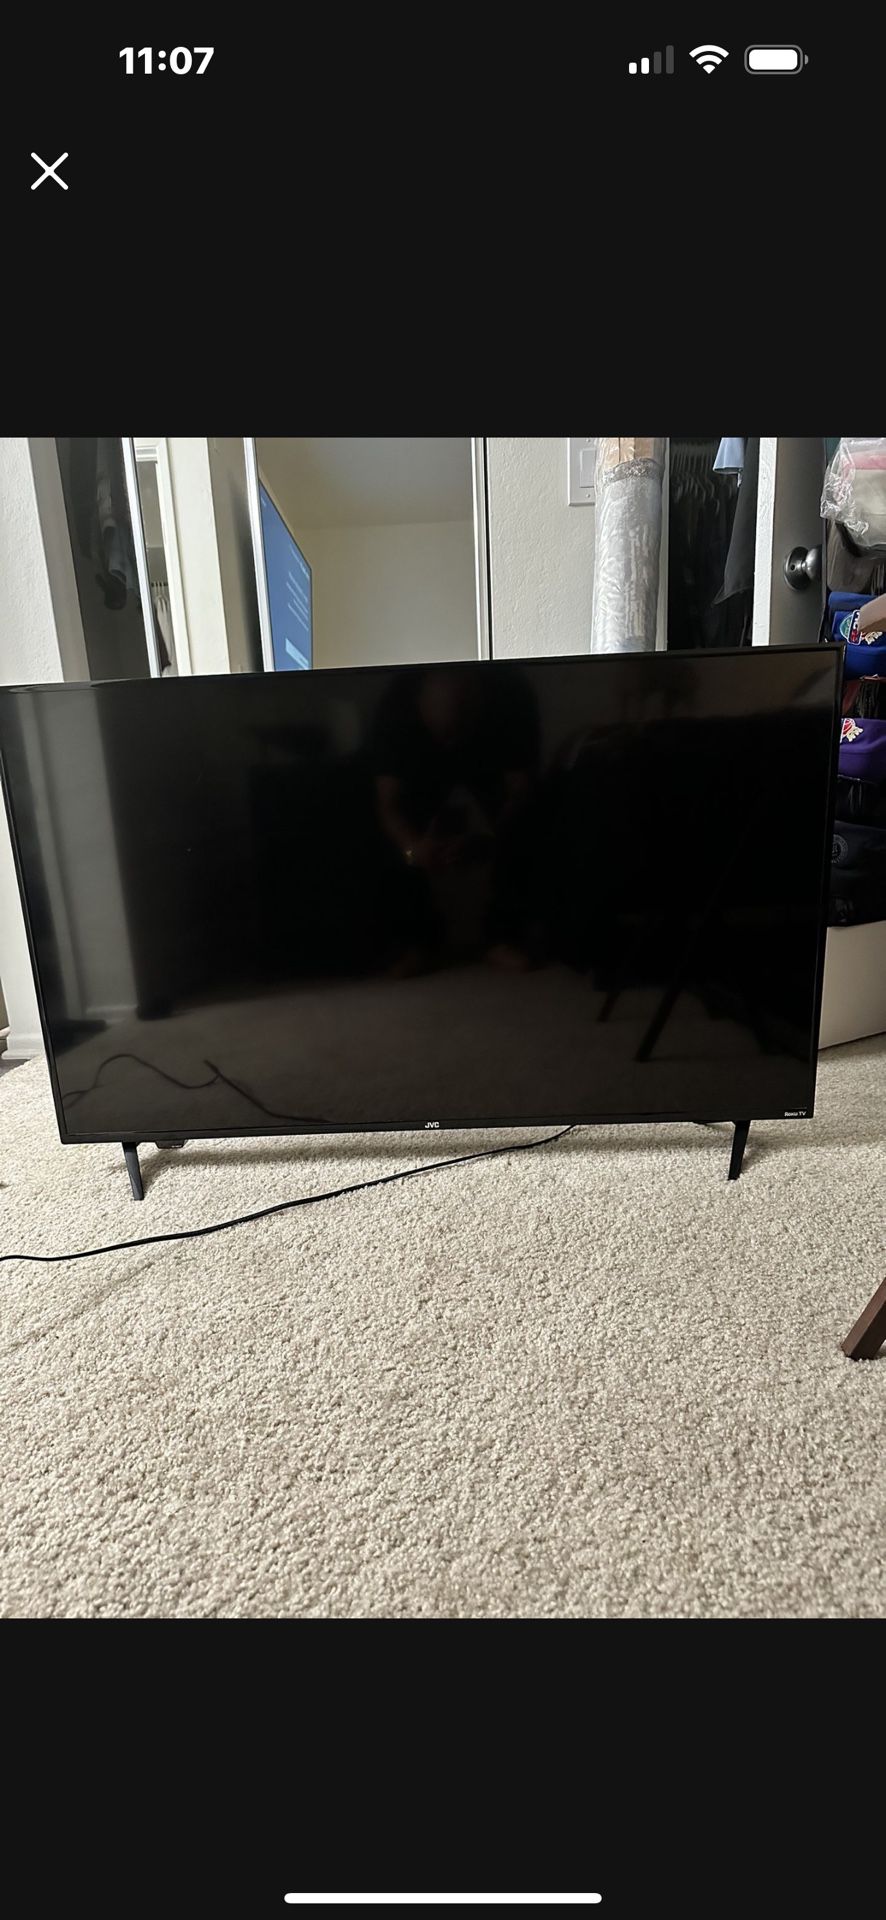 2 - 45 Inch TVs- Roku With Remote And Sharp With Amazon Firestick and Nightstand $350 OBO 